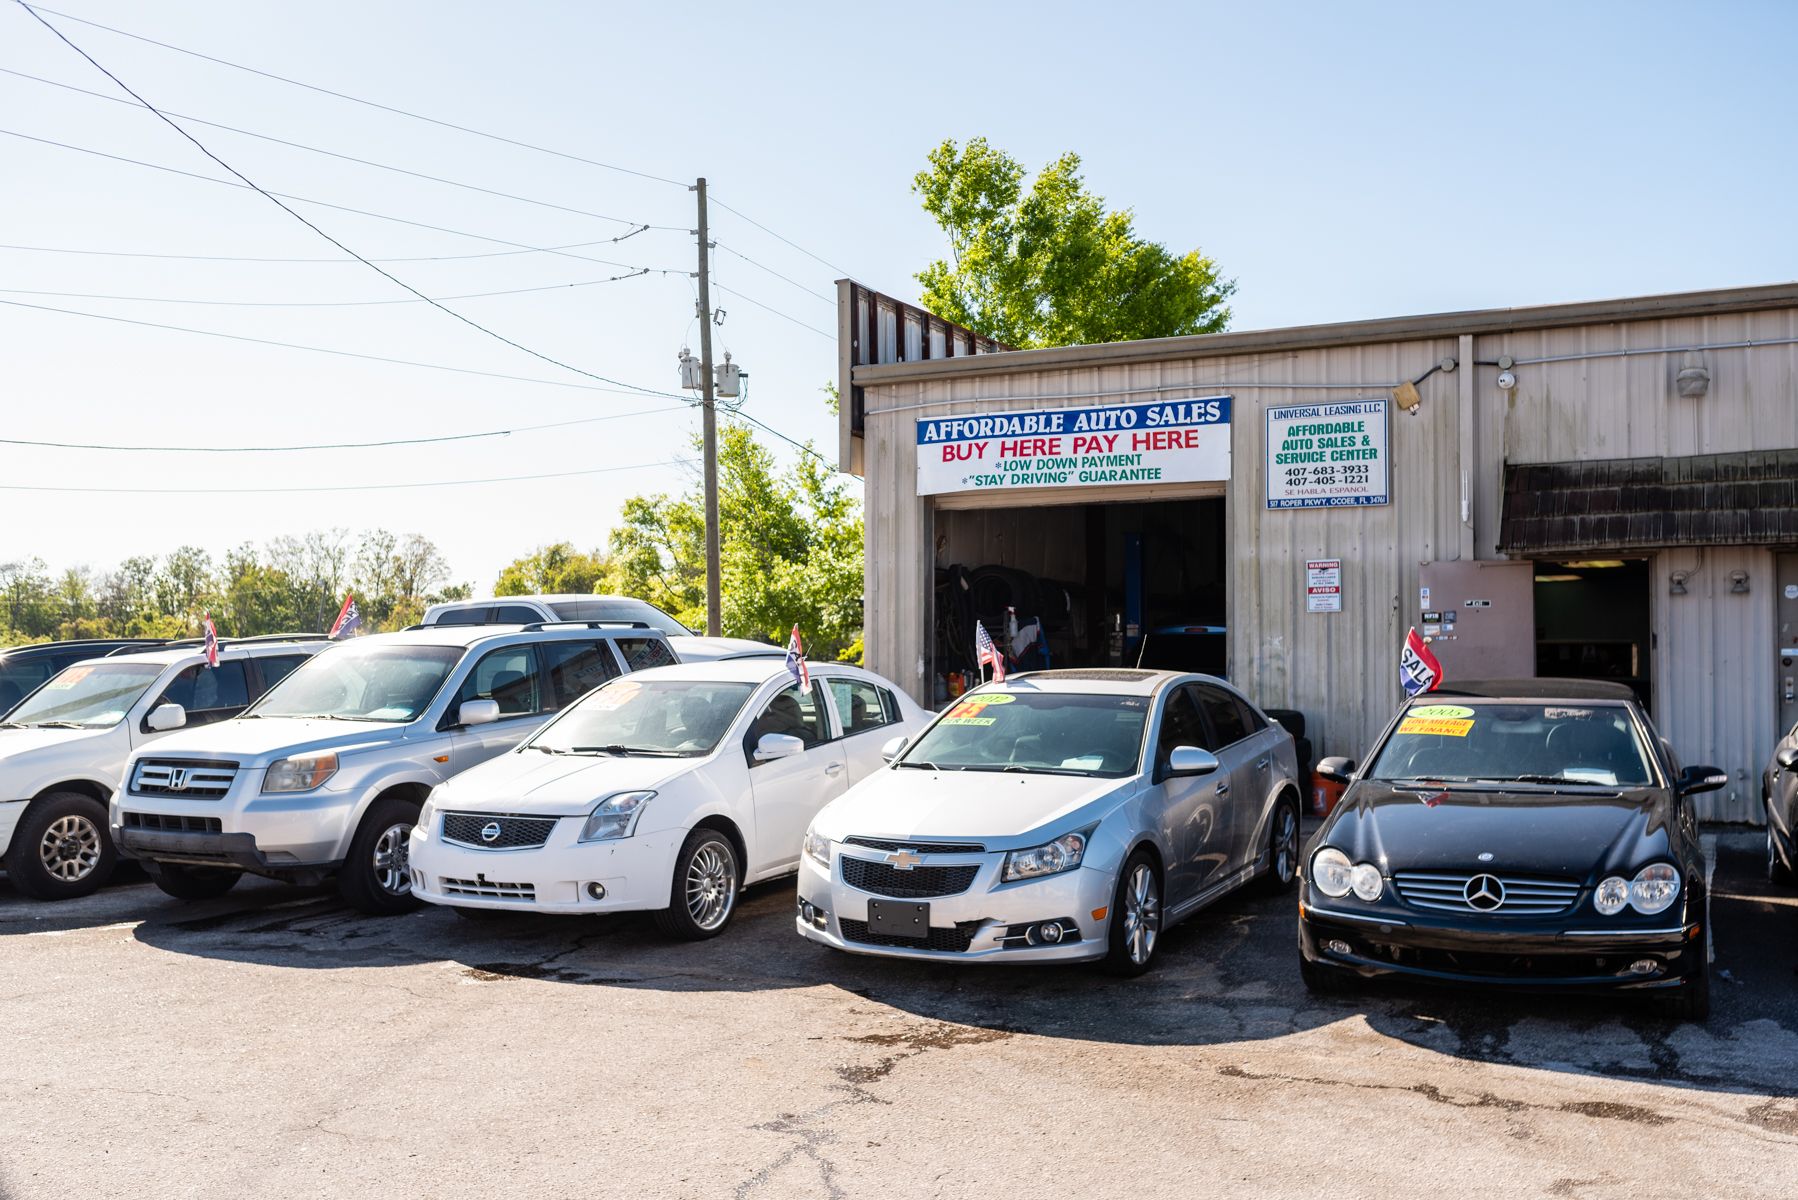 Affordable Auto Sales & Service